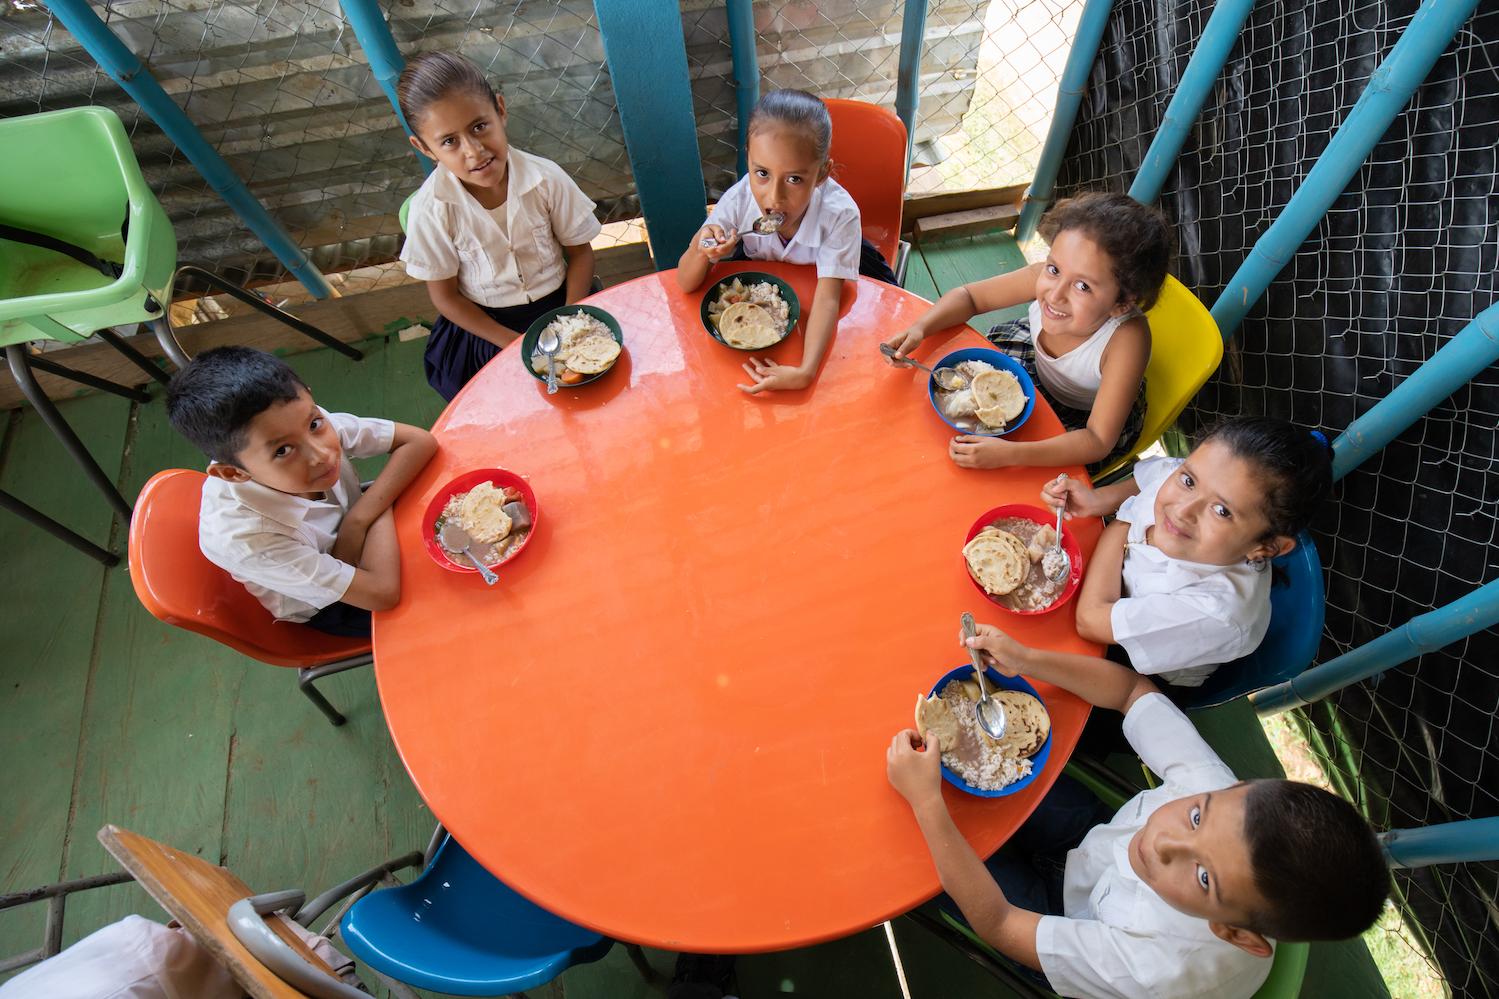 Feed the Children - children eating at the table - fighting hunger